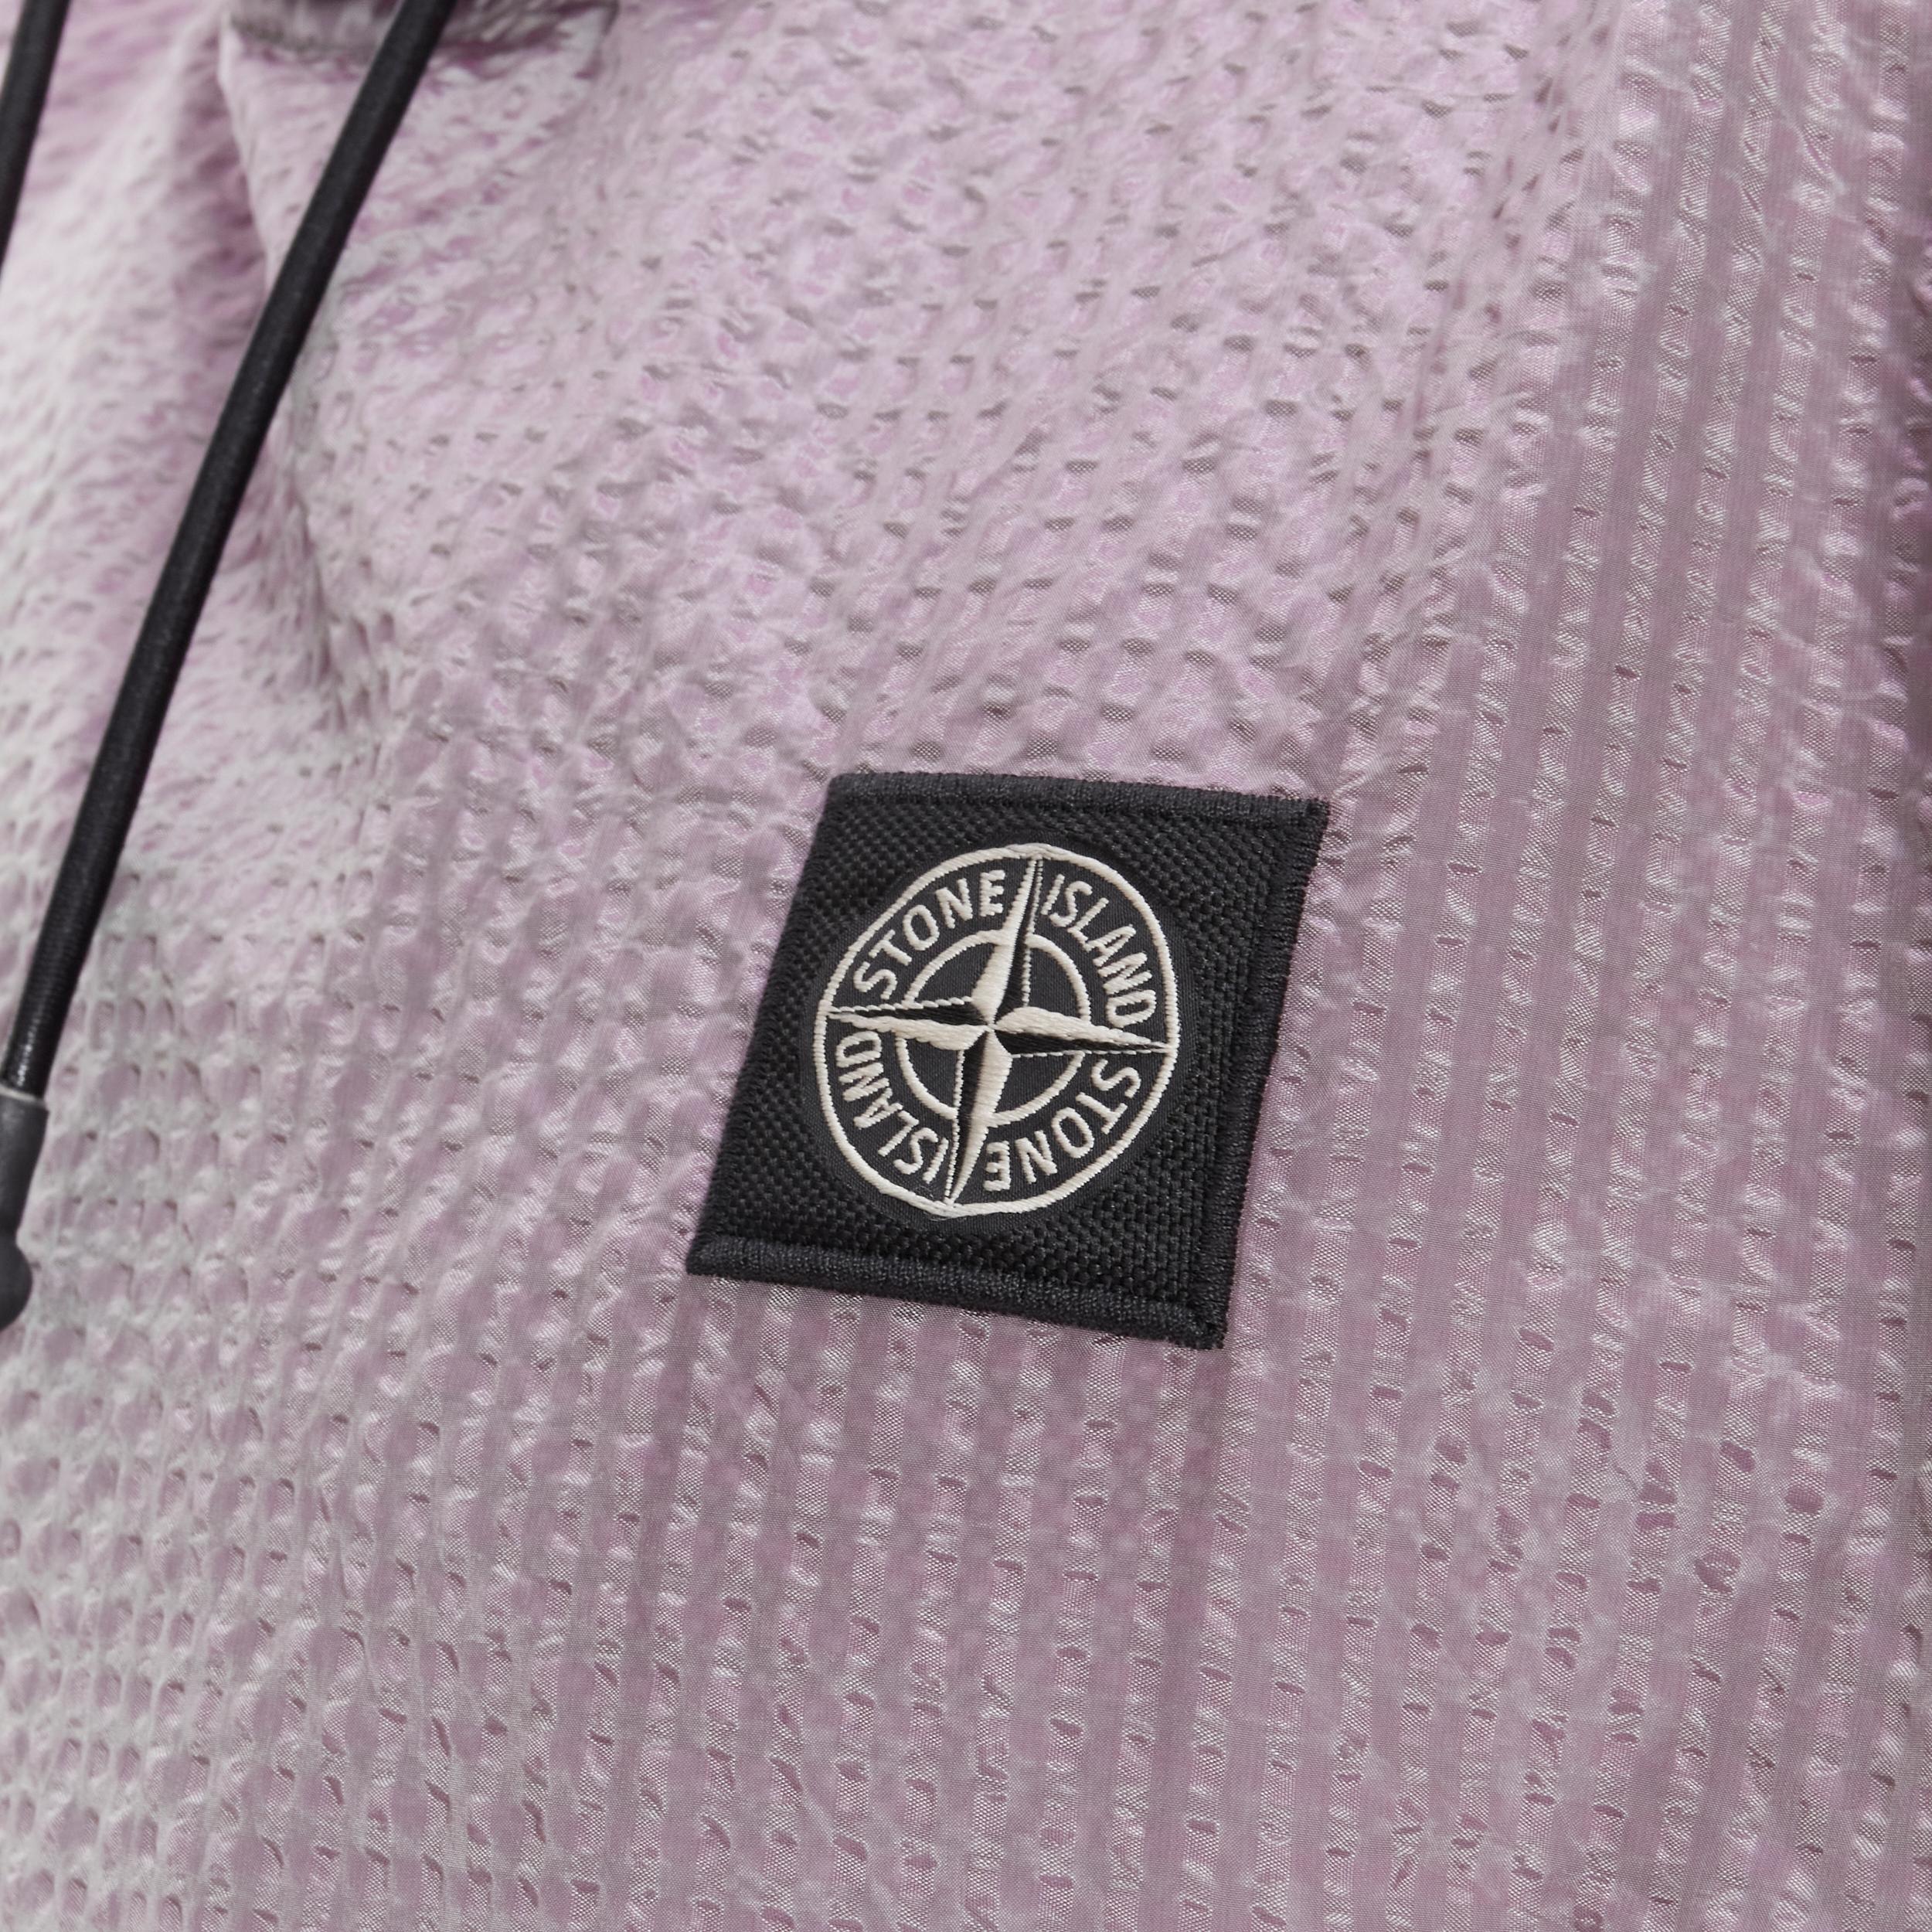 new STONE ISLAND Poly Frame iridescent purple seersucker nylon pullover hoodie M
Reference: TGAS/B01232
Brand: Stone Island
Material: Nylon
Color: Purple
Pattern: Solid
Closure: Drawstring
Extra Detail: Purple green iridescent nylon seersucker.